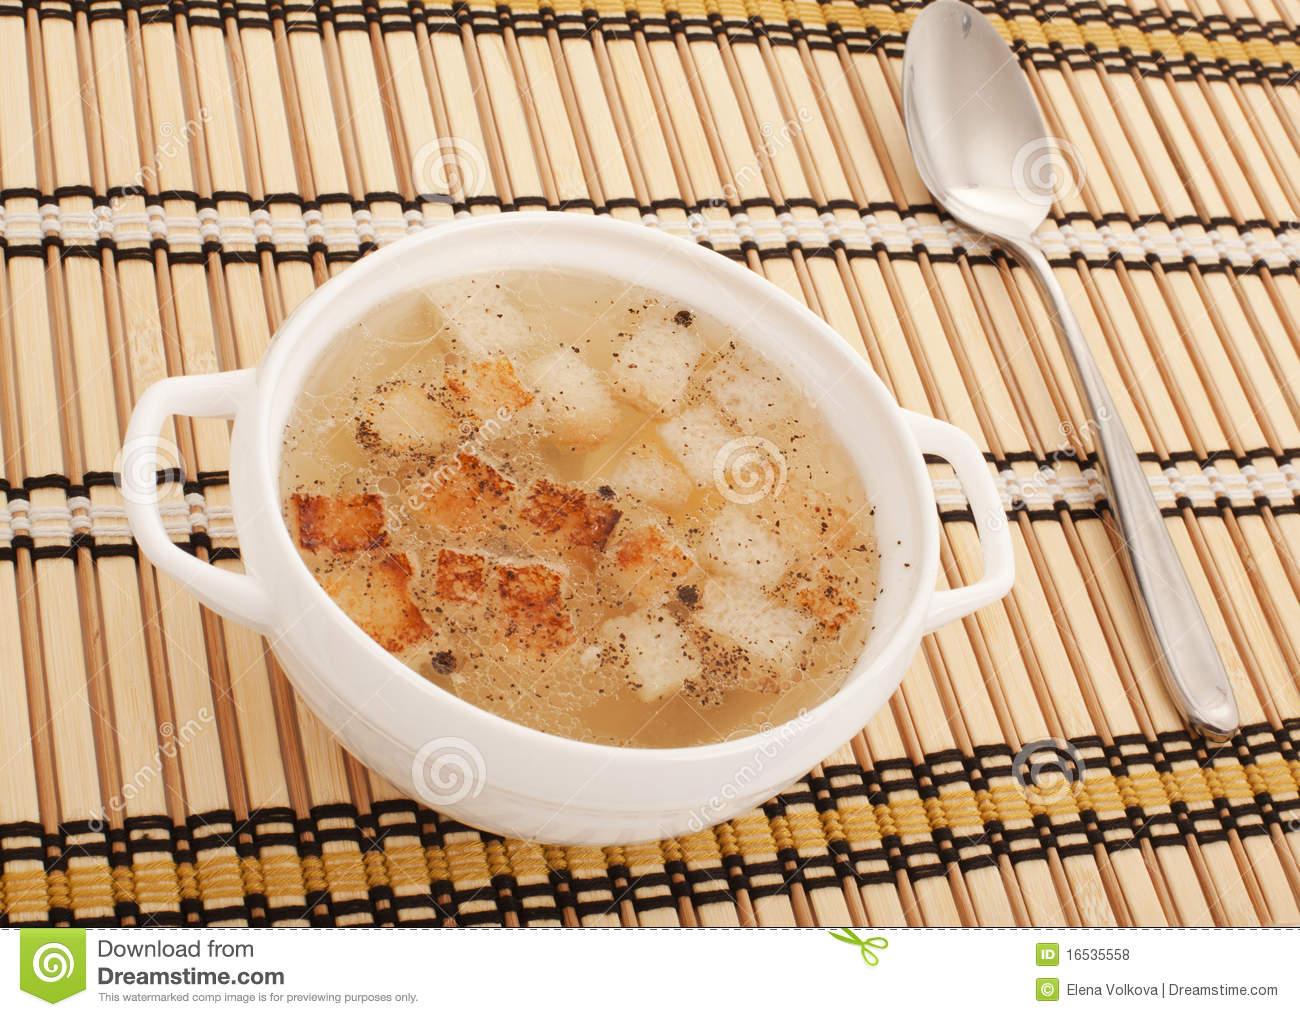 Chicken Broth With Egg And Breadcrumbs Royalty Free Stock Photos